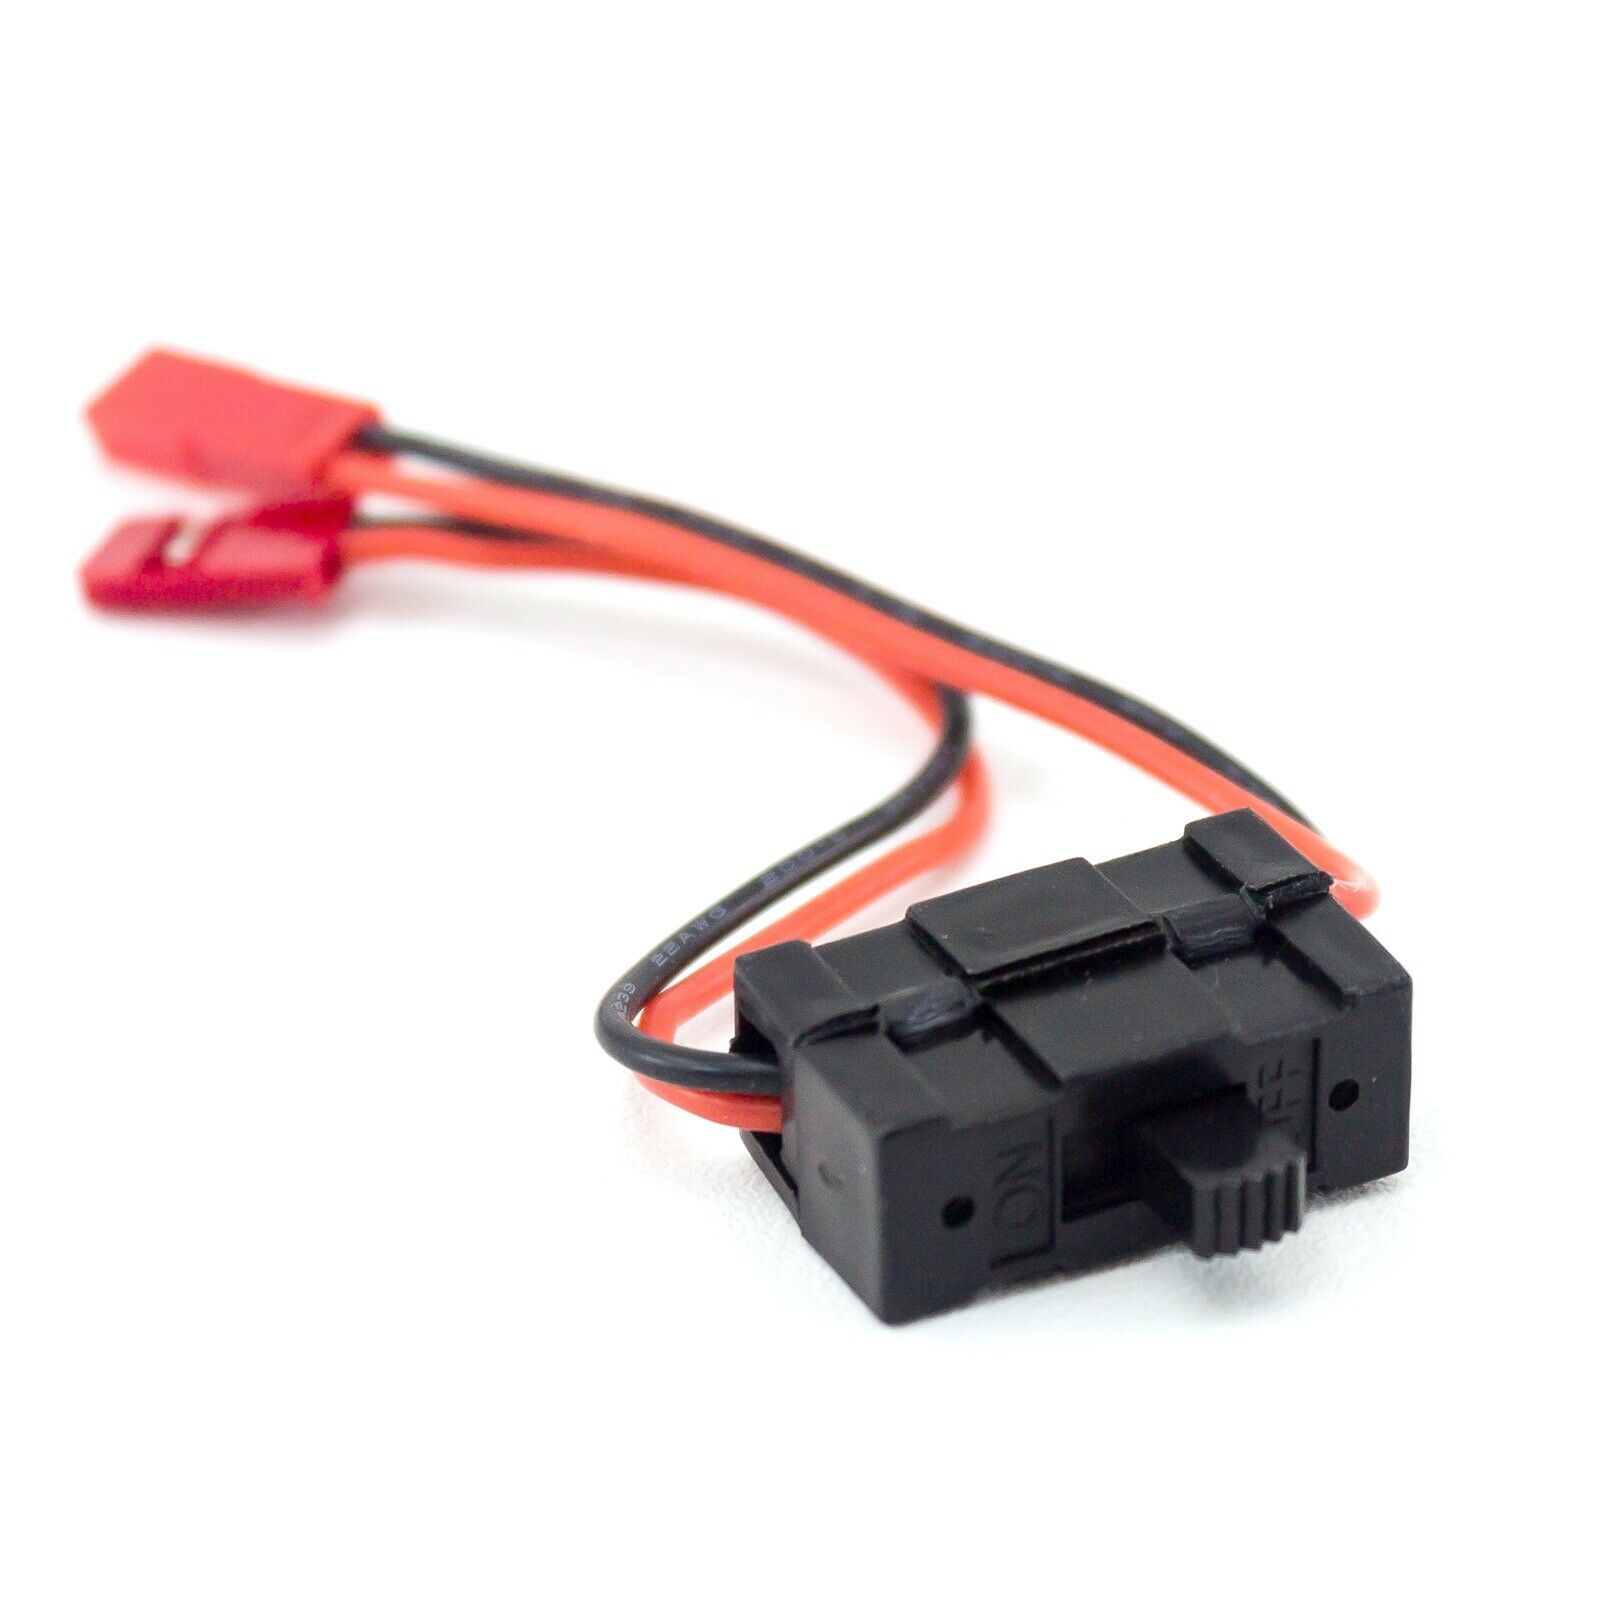 Hsp 02050 Power On/off Switch For Redcat Nitro Shockwave Tornado Volcano S30